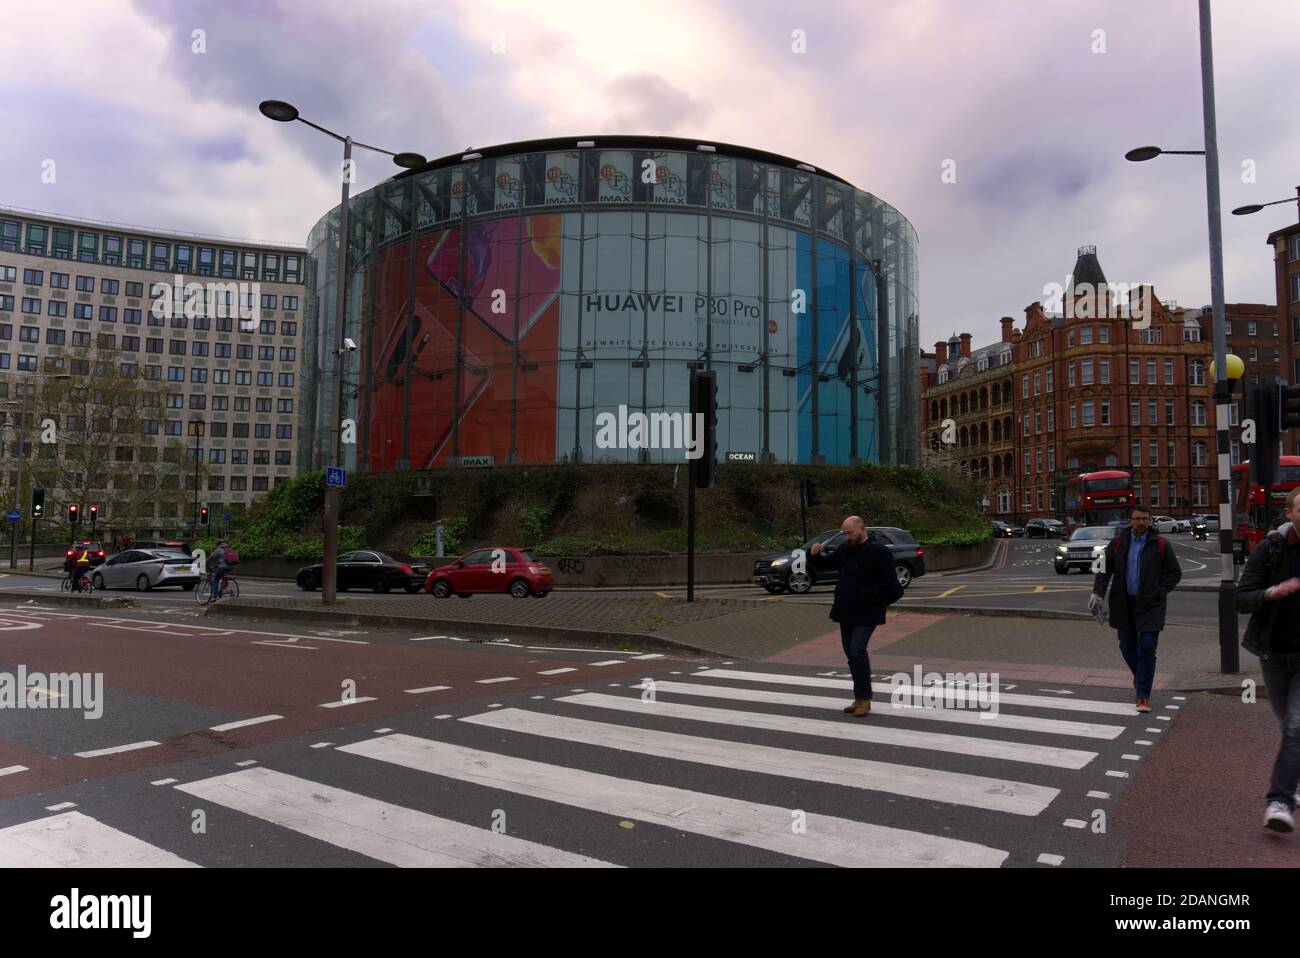 Waterloo, London, United Kingdom - April 12, 2019: IMAX theatre viewed across road and crossing with some motion blurring Stock Photo